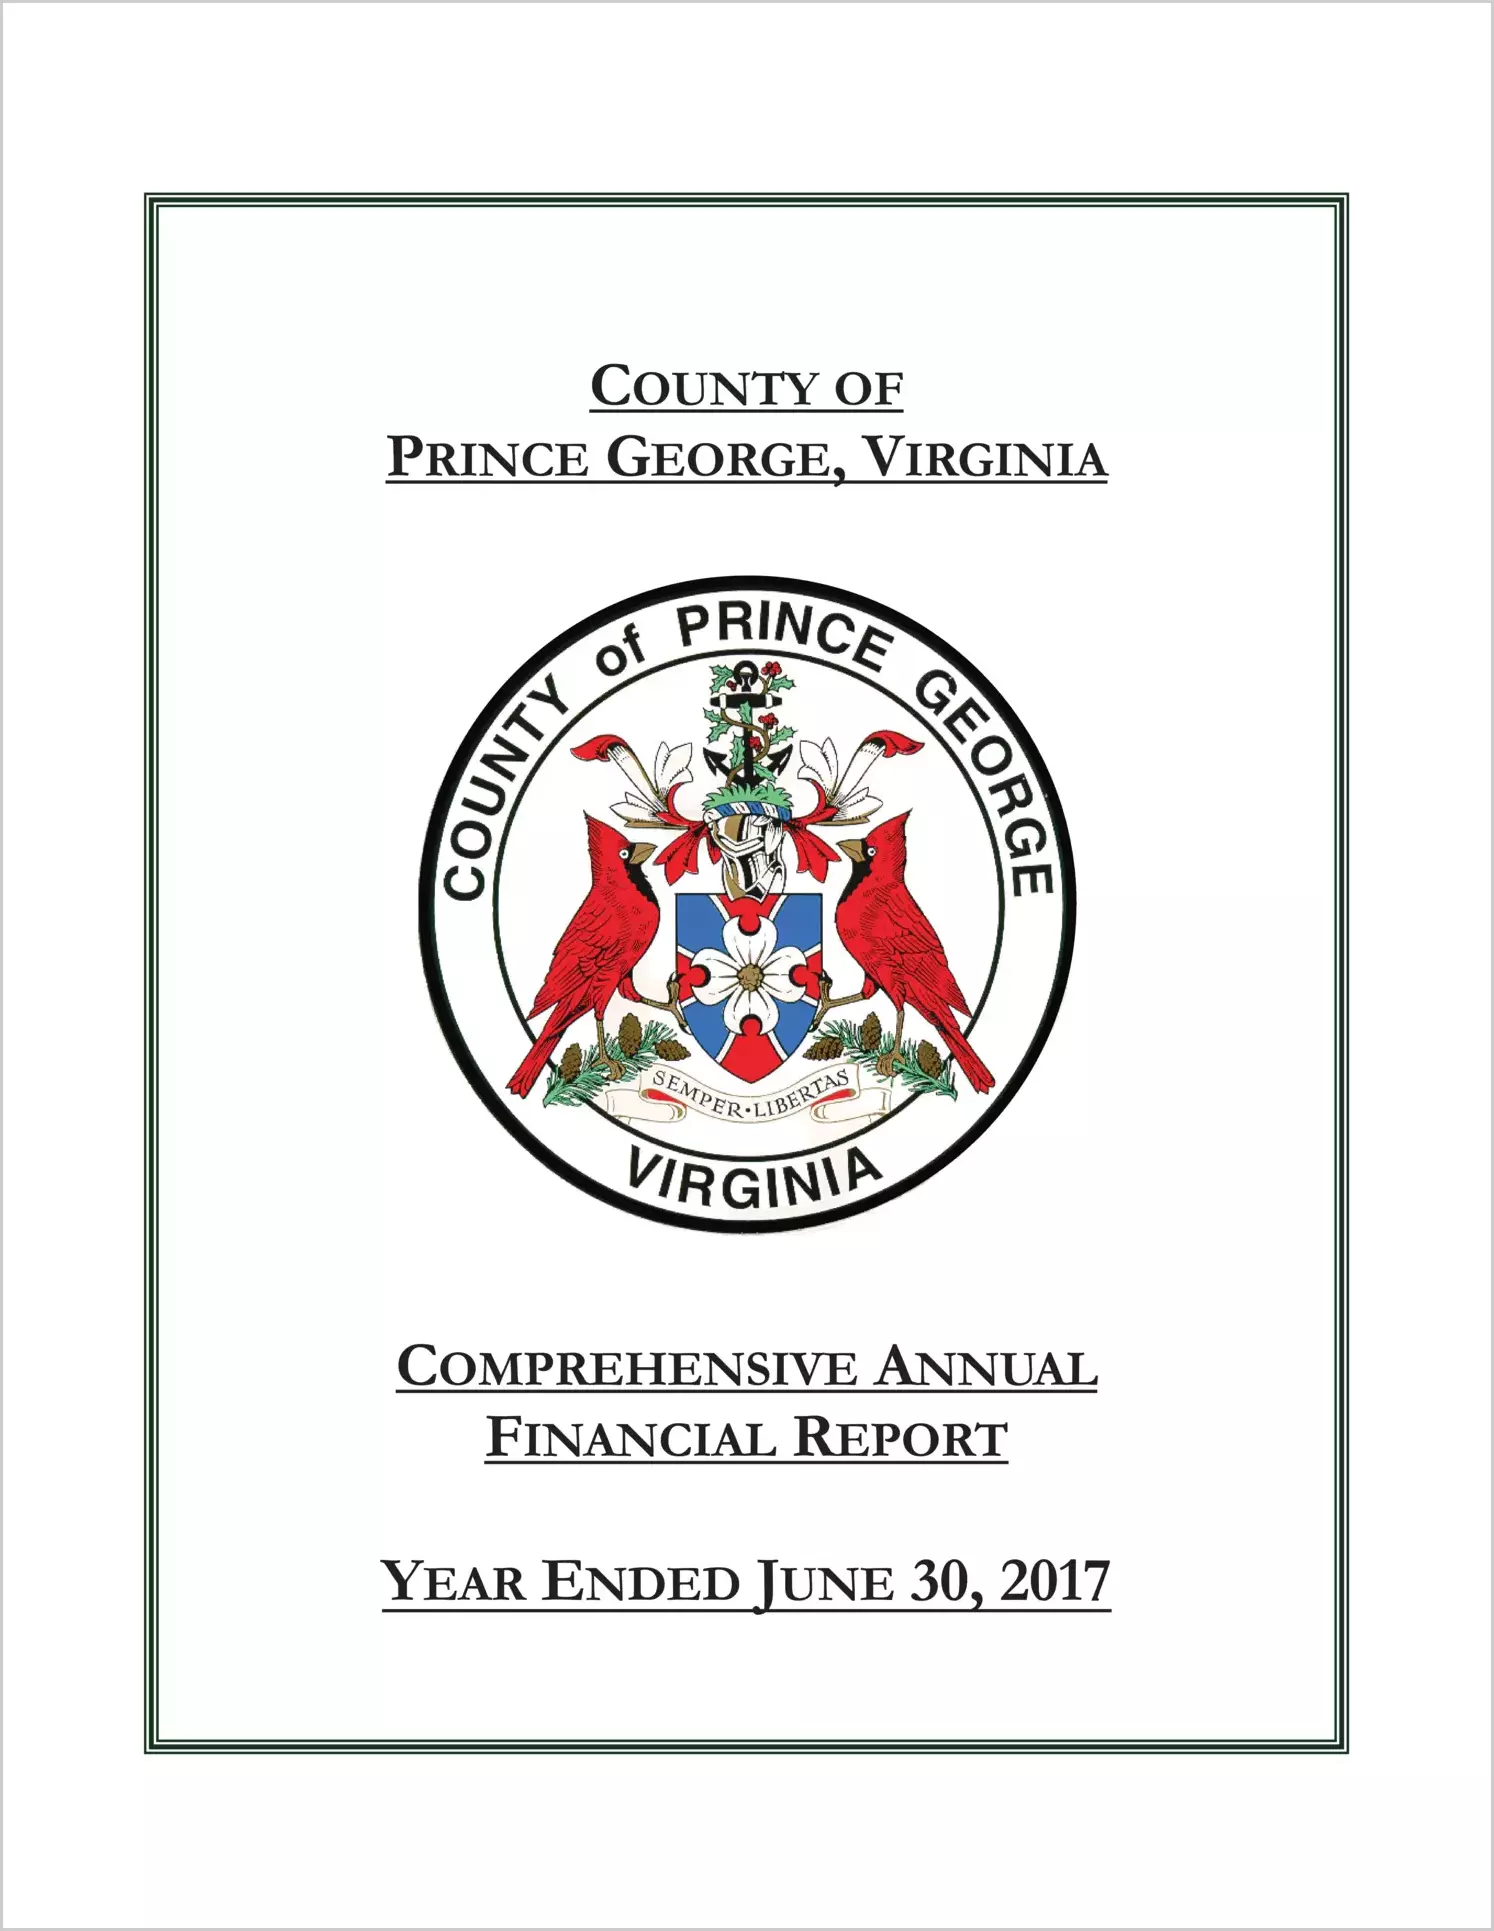 2017 Annual Financial Report for County of Prince George